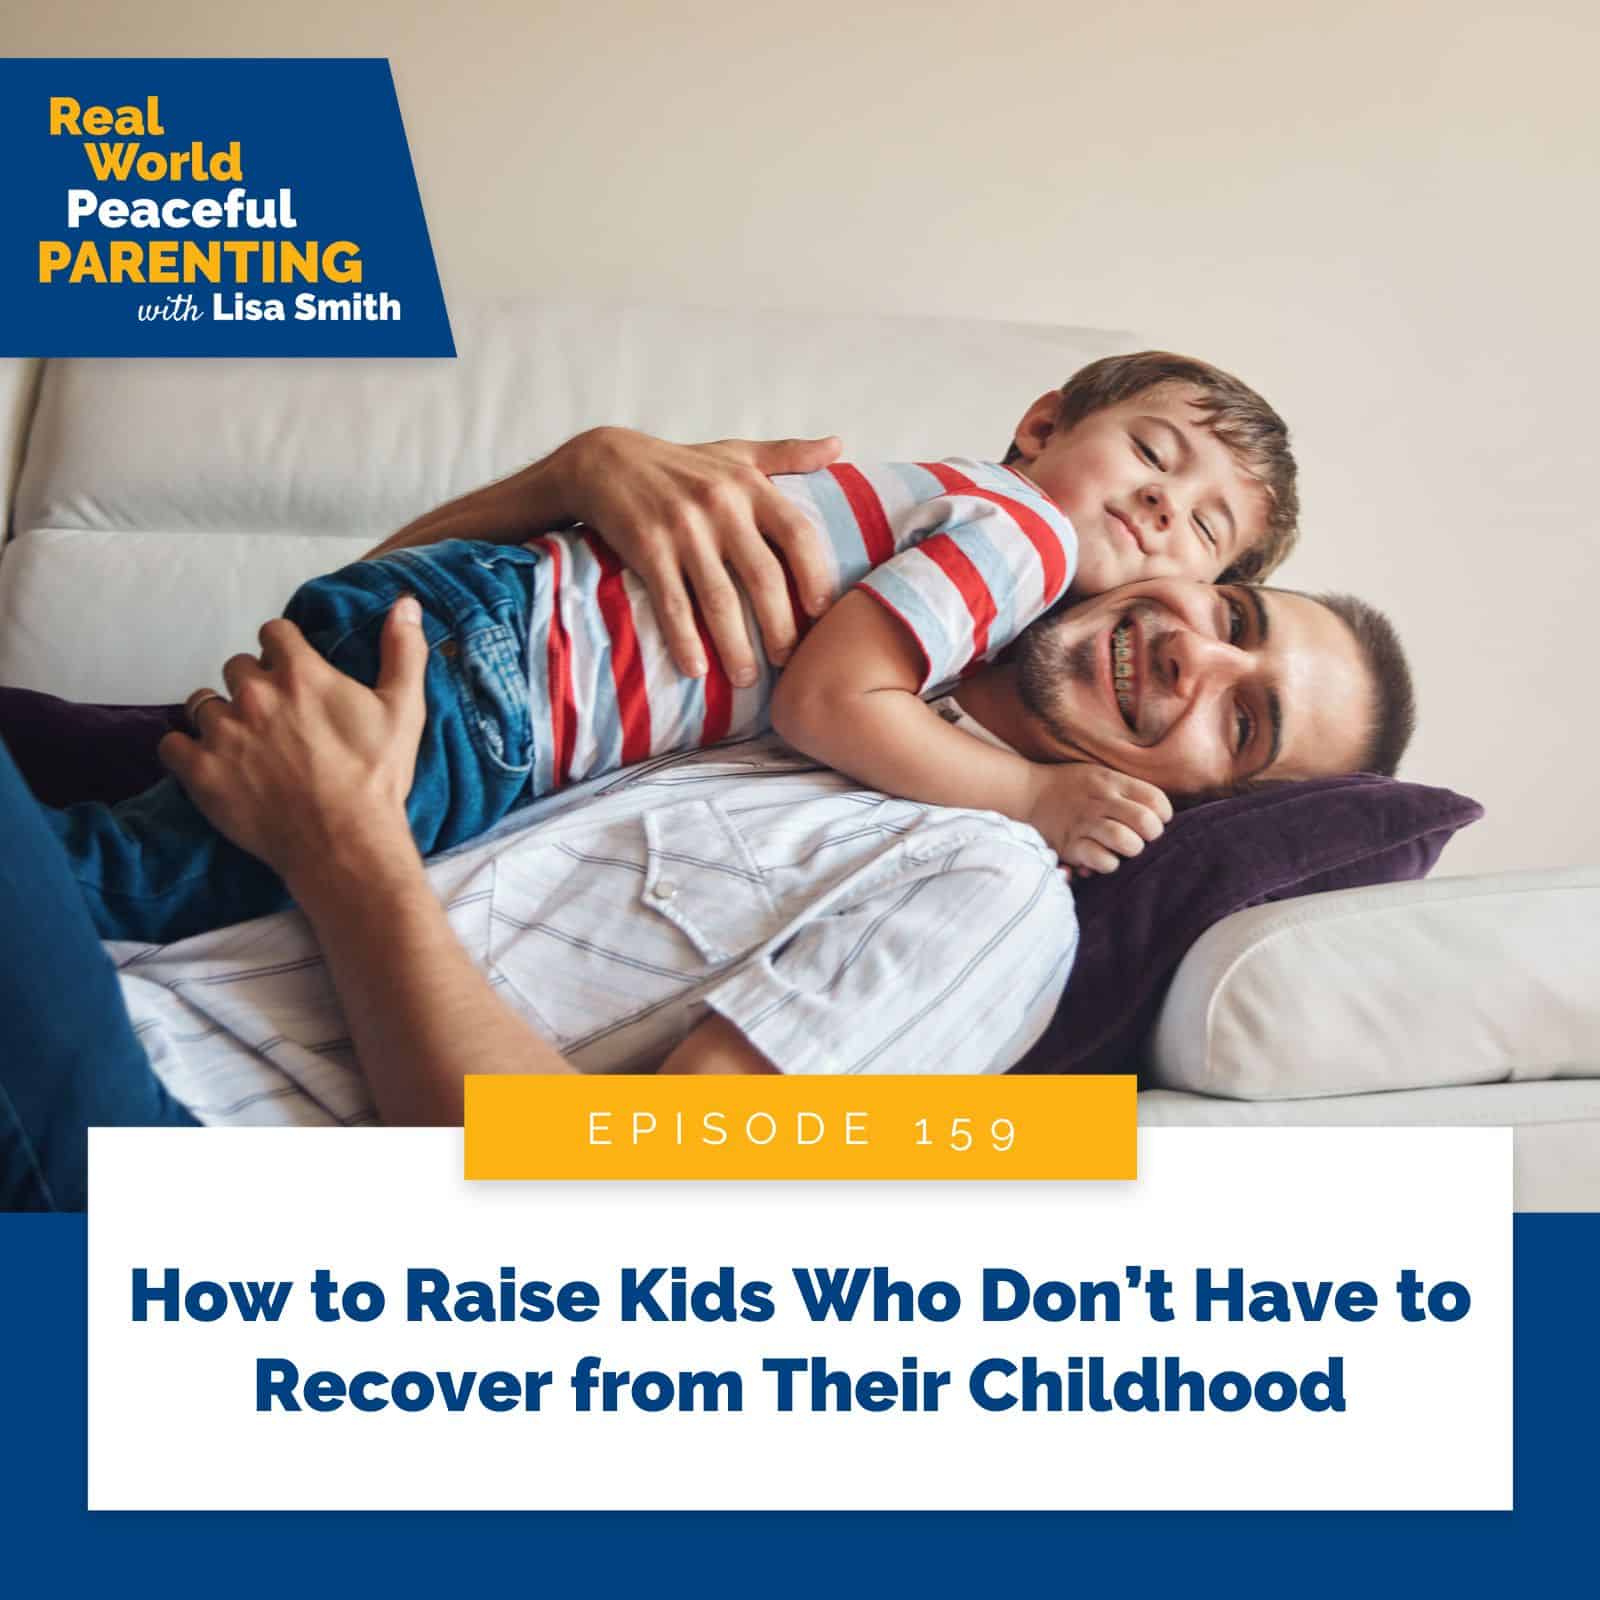 Real World Peaceful Parenting with Lisa Smith | How to Raise Kids Who Don’t Have to Recover from Their Childhood